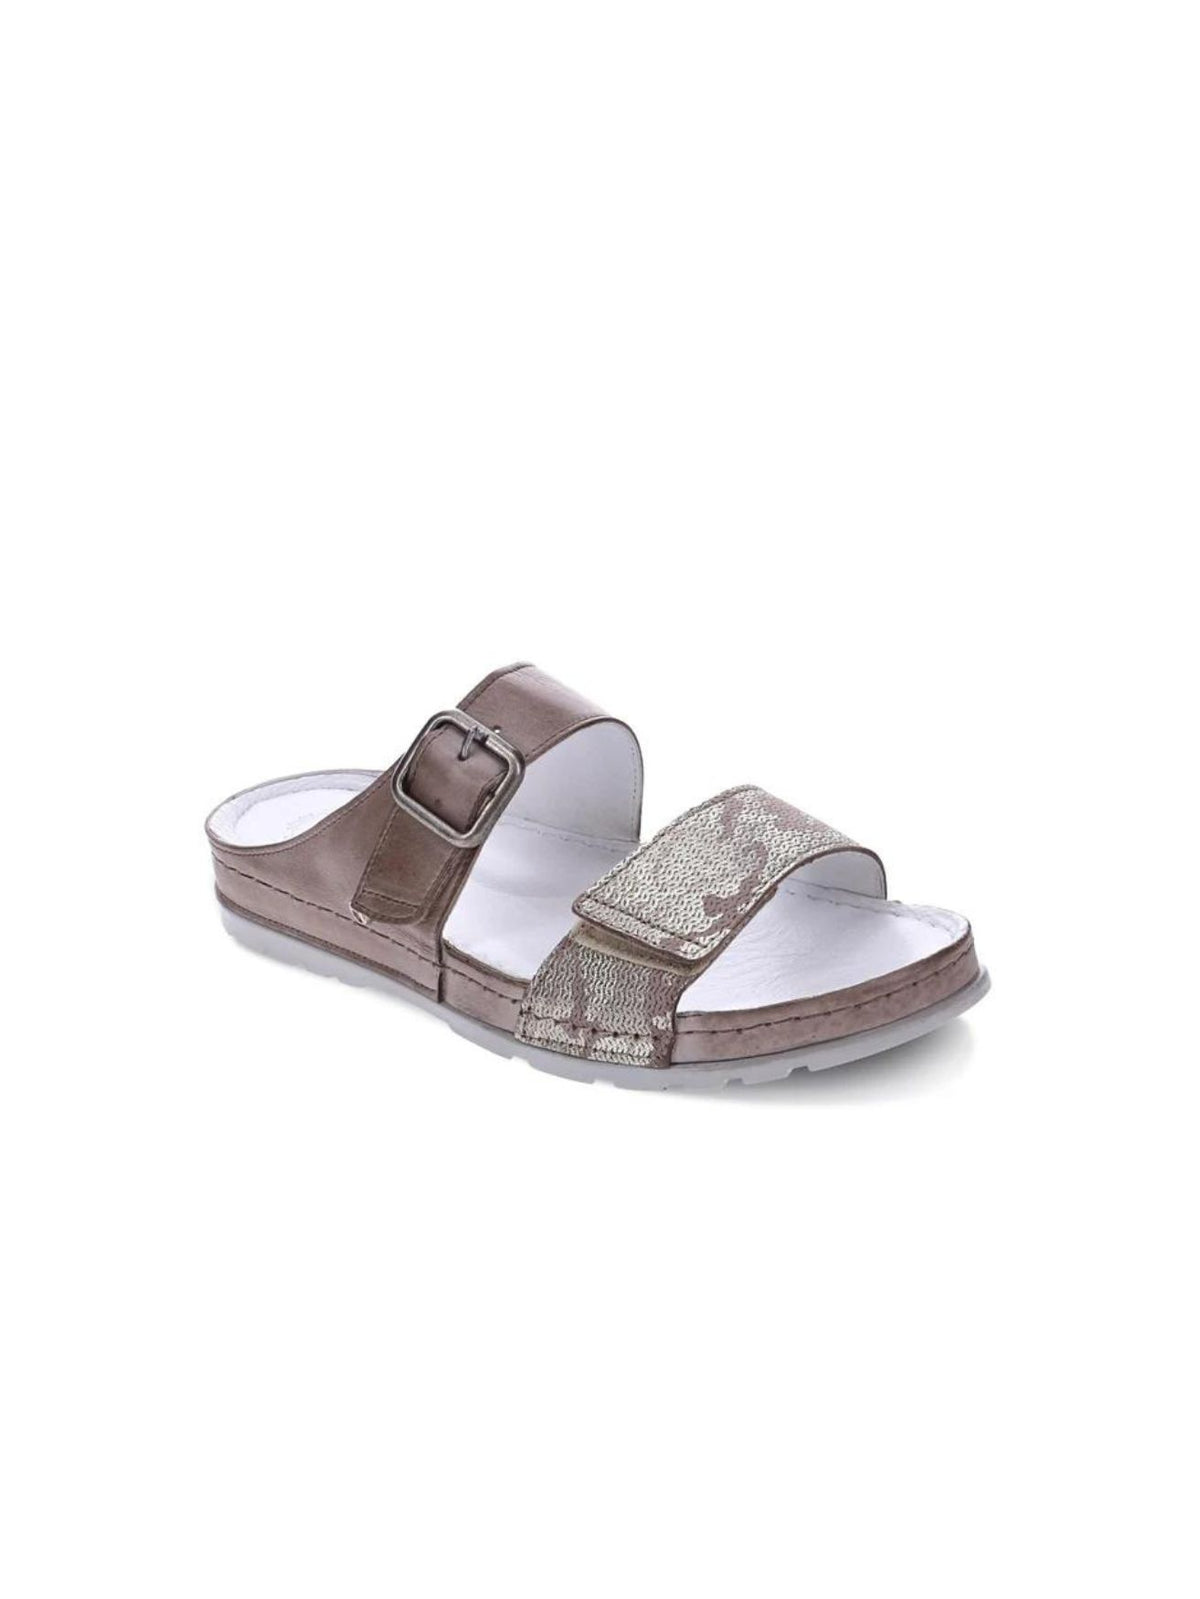 revere palma  2 strap slide sandals in taupe-angled view